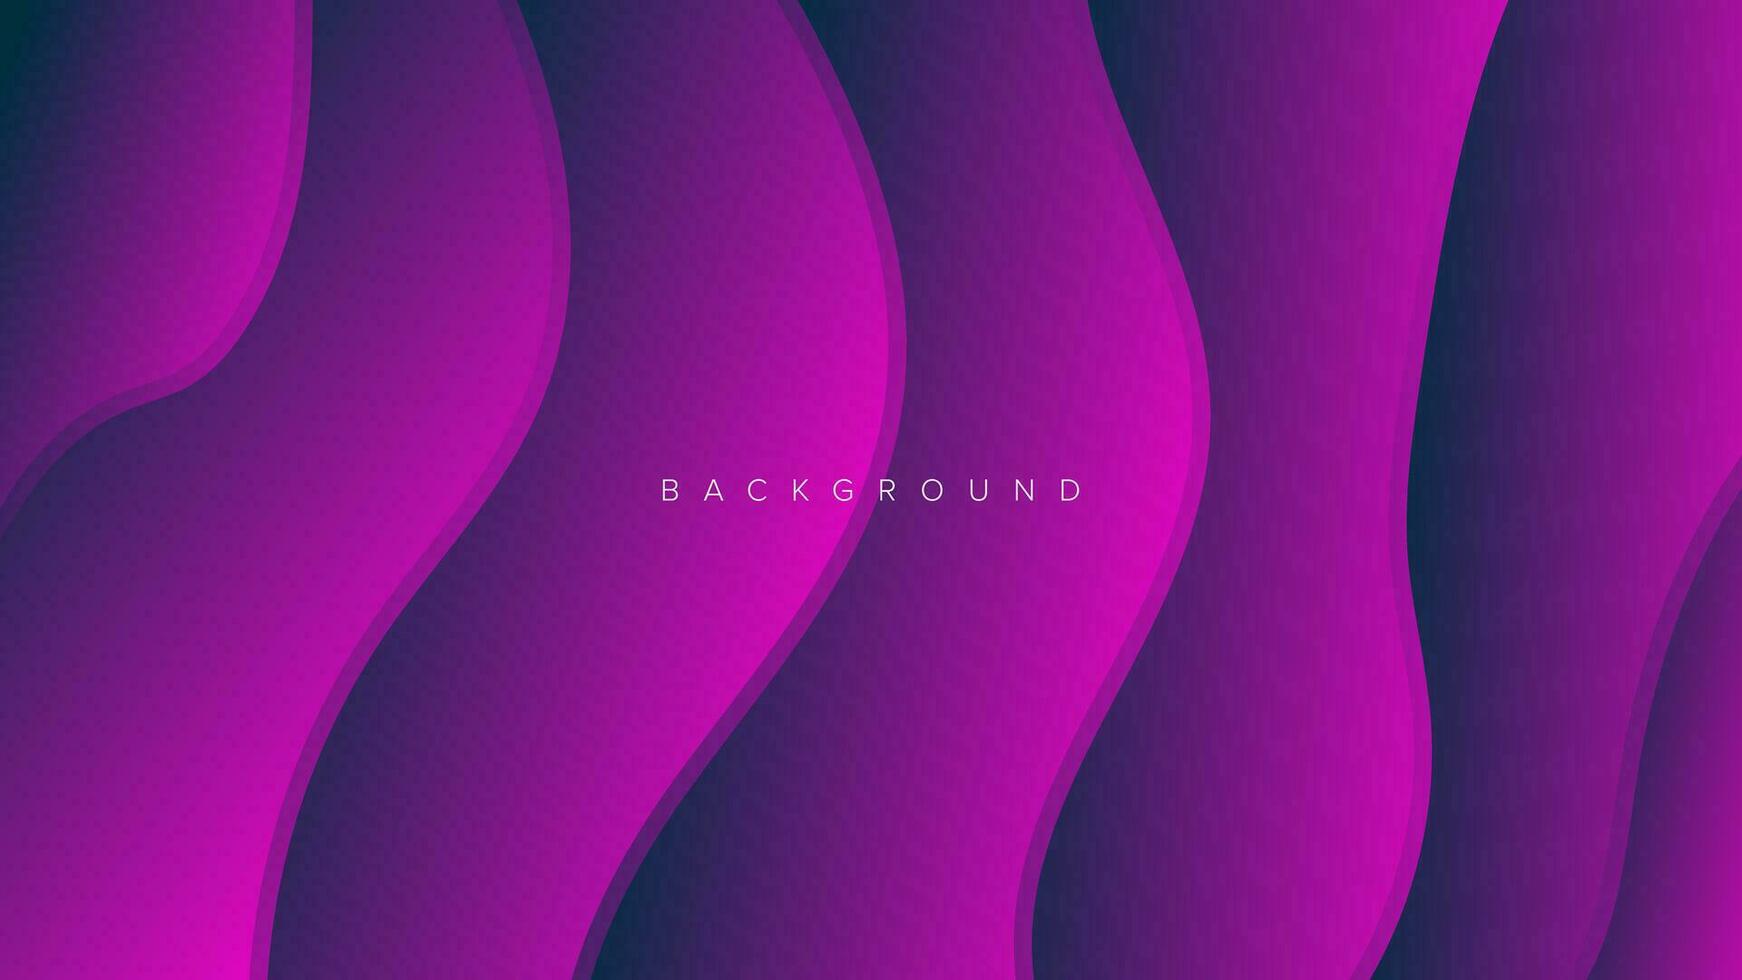 Abstract background banner wave gradient color design vector